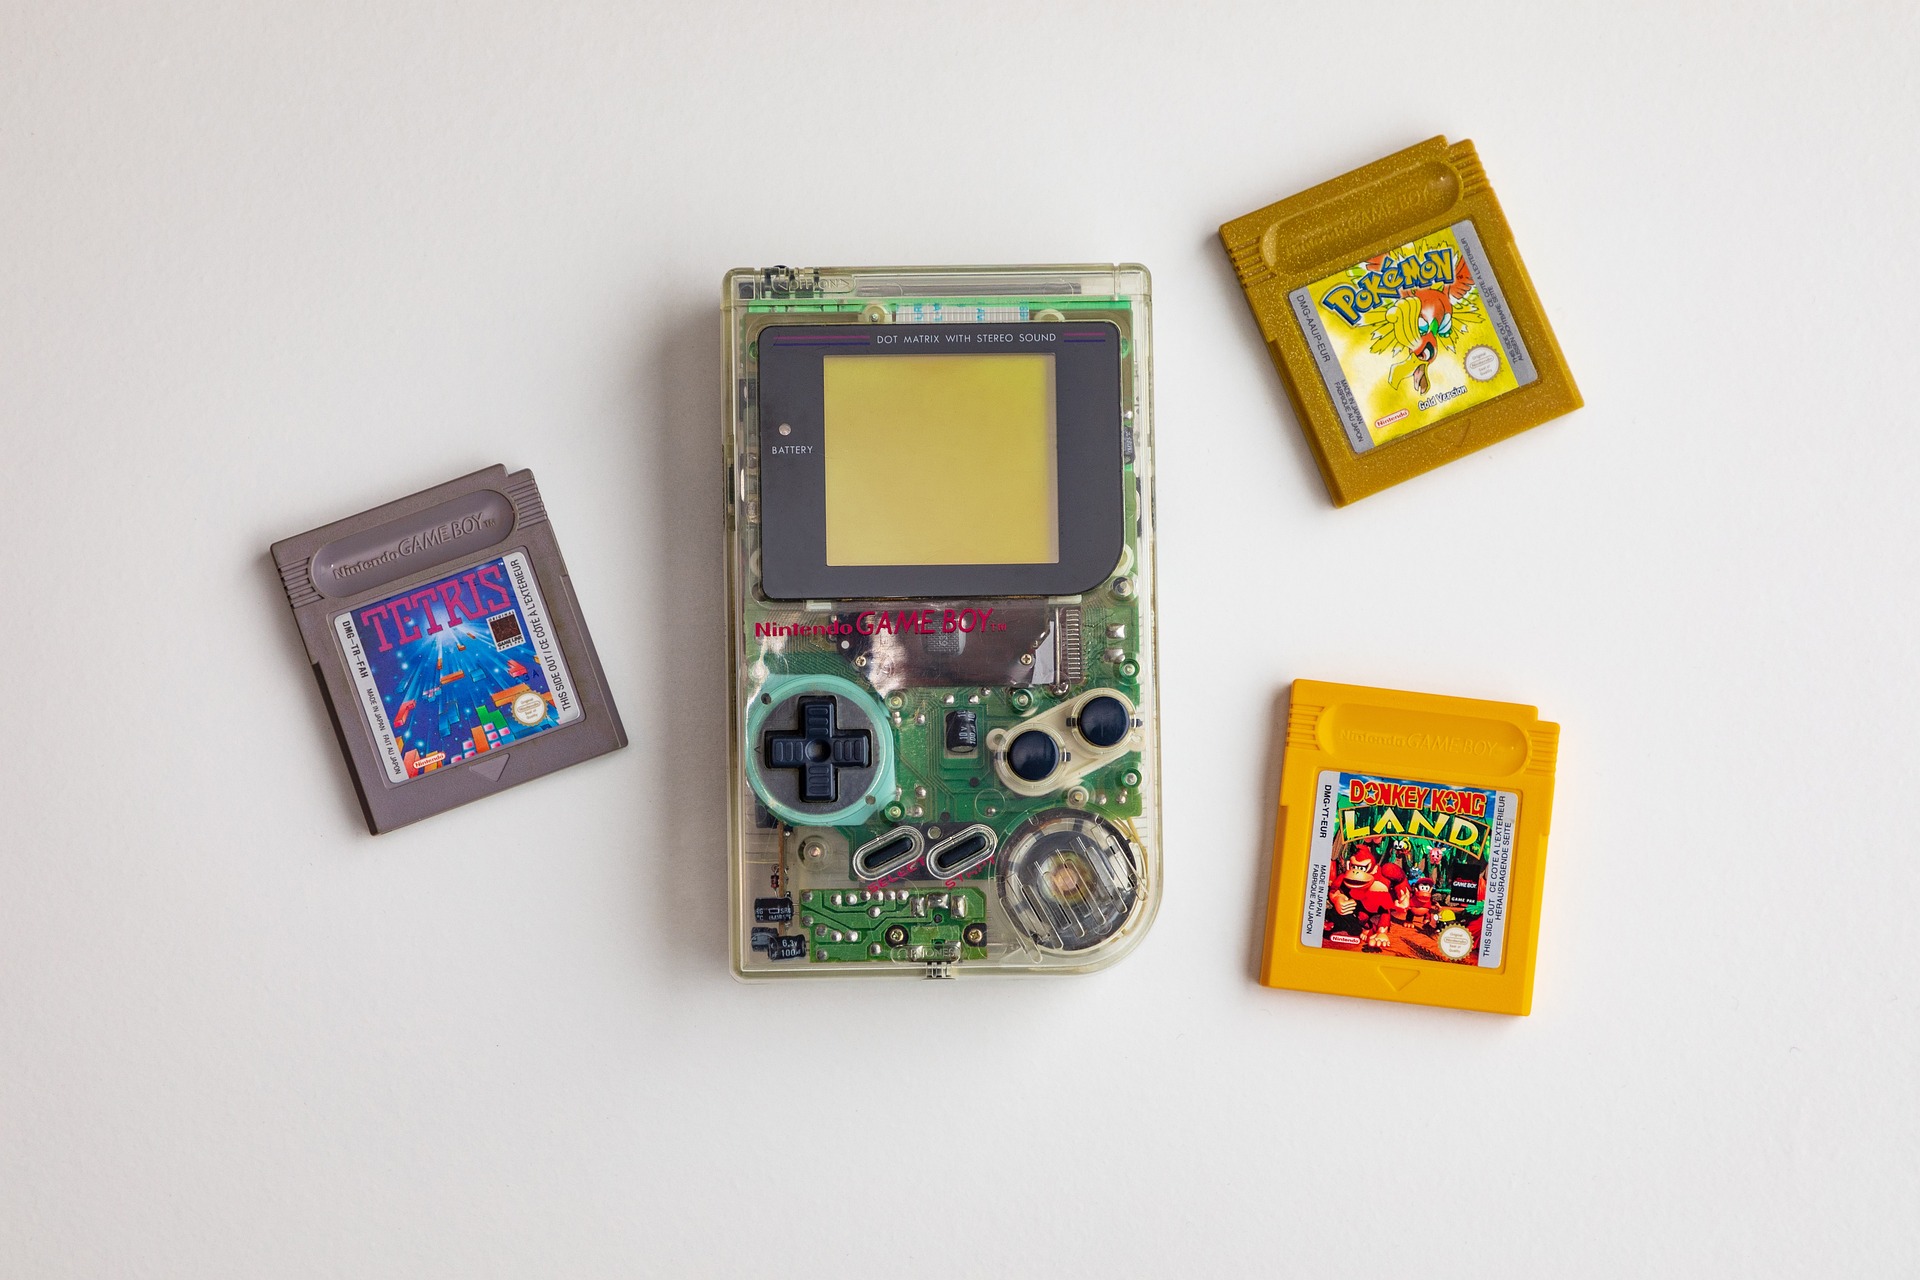 How I ported my music to the GameBoy